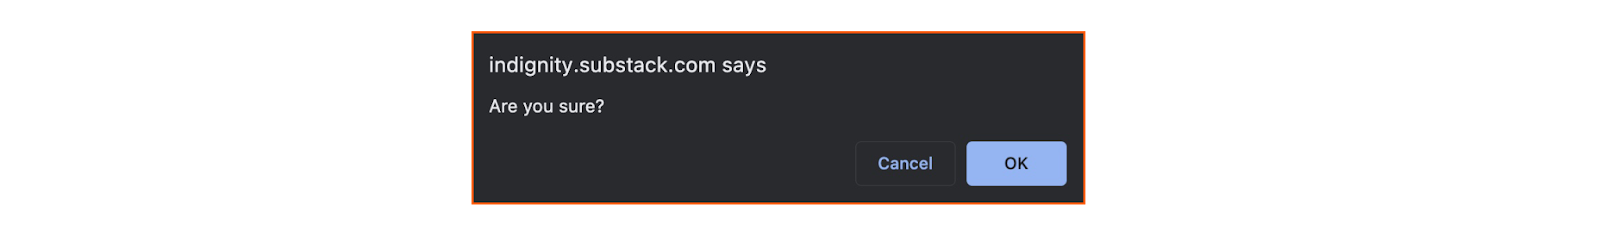 [ALT/CAPTION: A dialog box generated in the Substack platform. “indignity.substack.com says Are you sure?”]